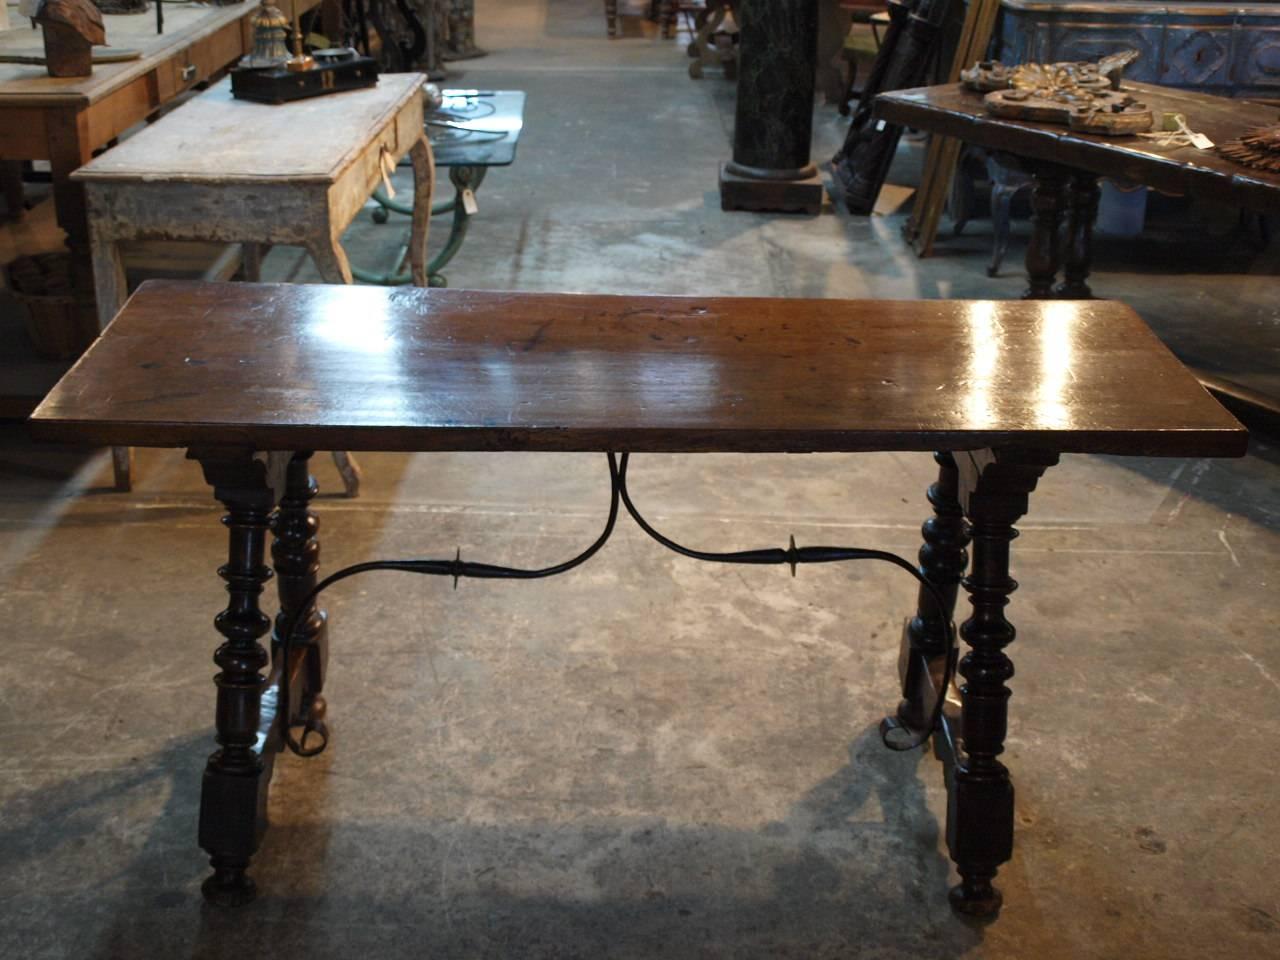 A very handsome 18th century console from the Catalan region in Spain. Beautifully constructed in walnut with a solid board top, turned splayed legs and hand forged iron stretchers. Serves wonderfully as a sofa table or serving table as well.